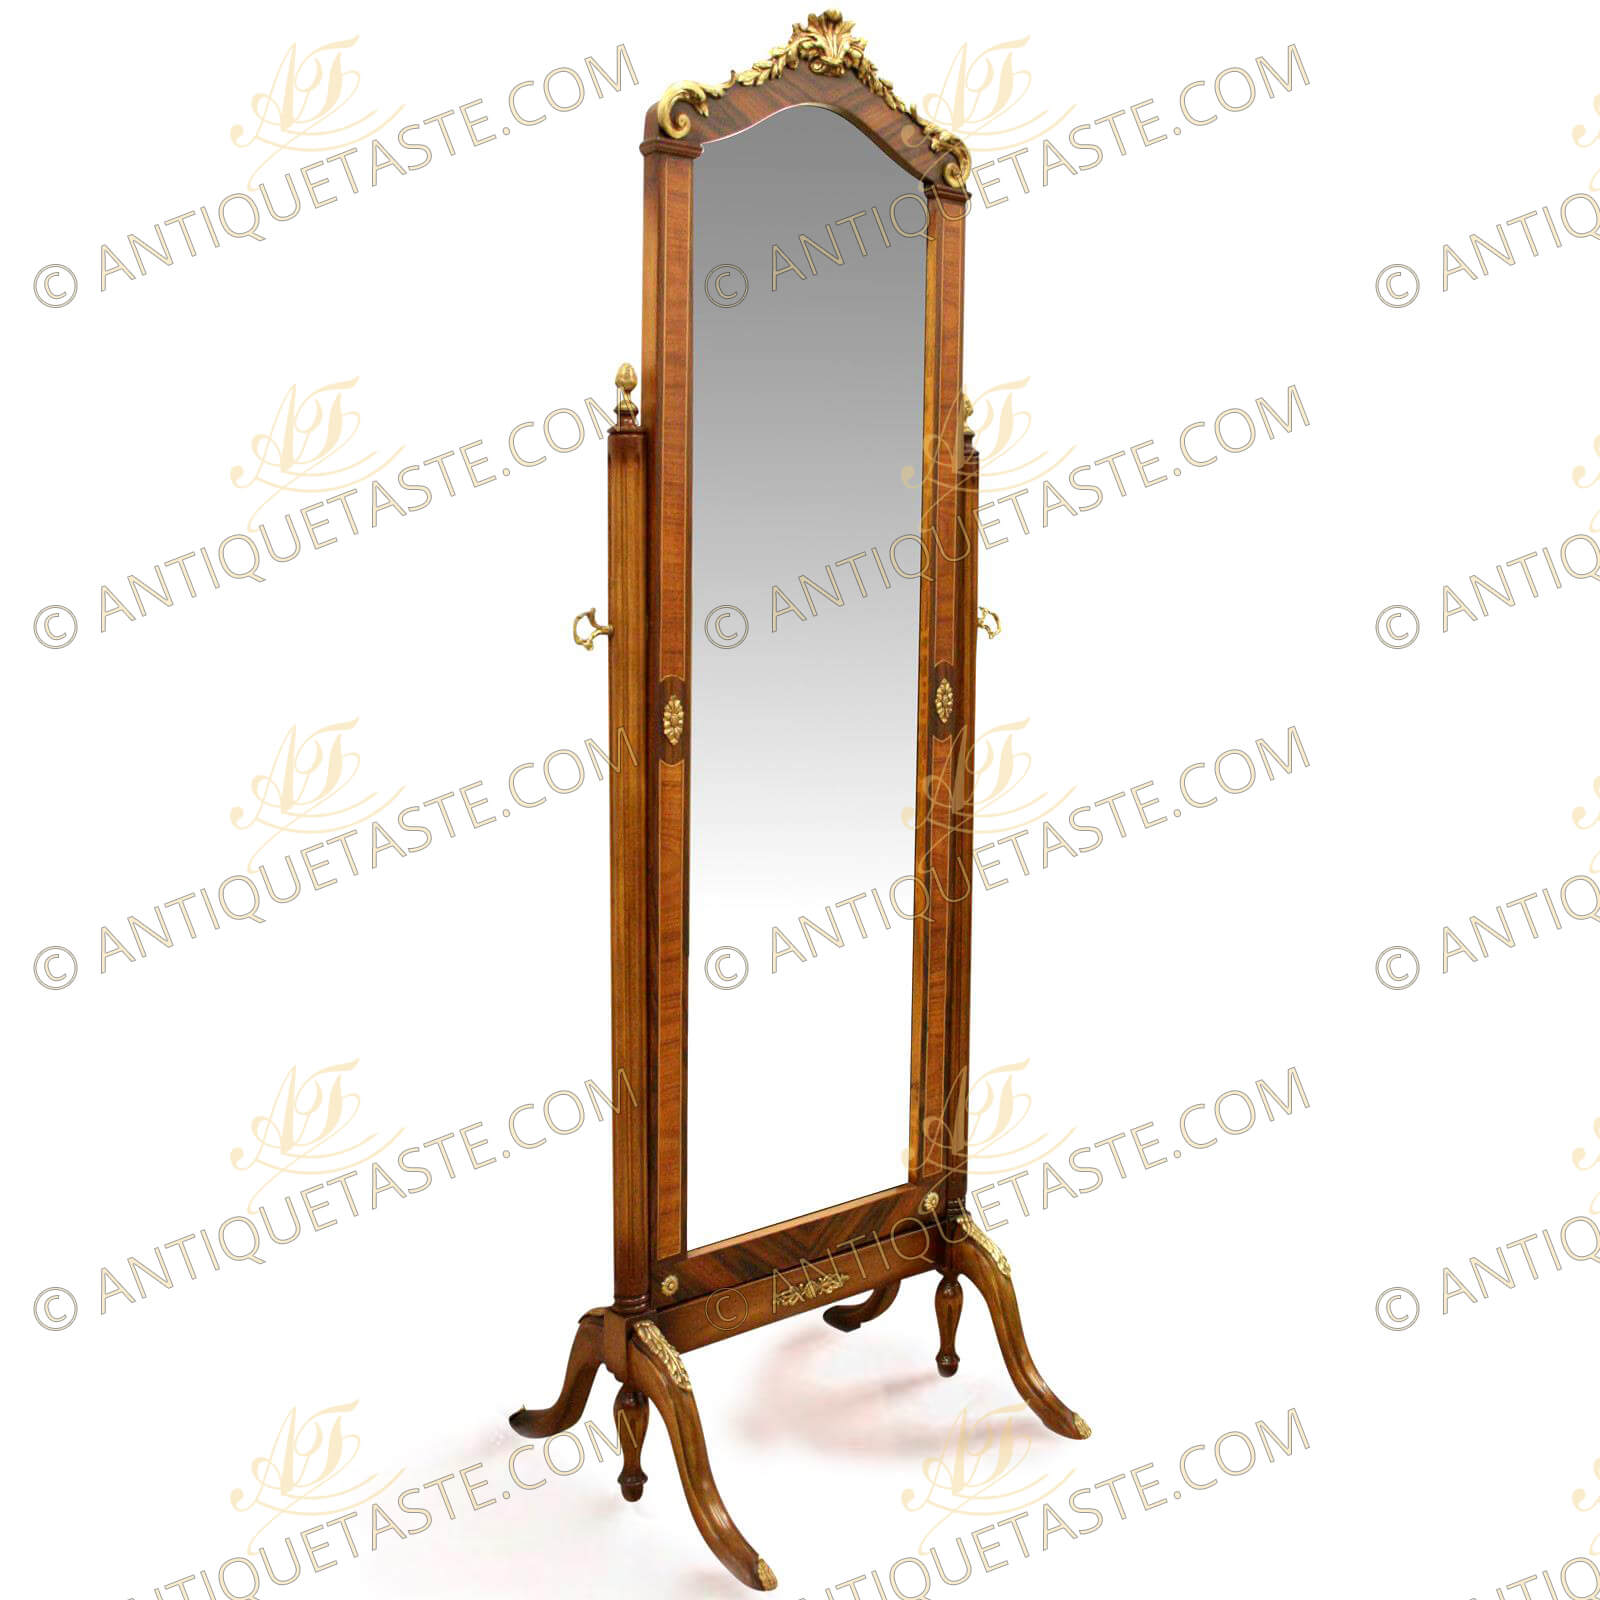 Transitional Louis XVI and Rococo style ormolu-mounted veneer inlaid cheval mirror